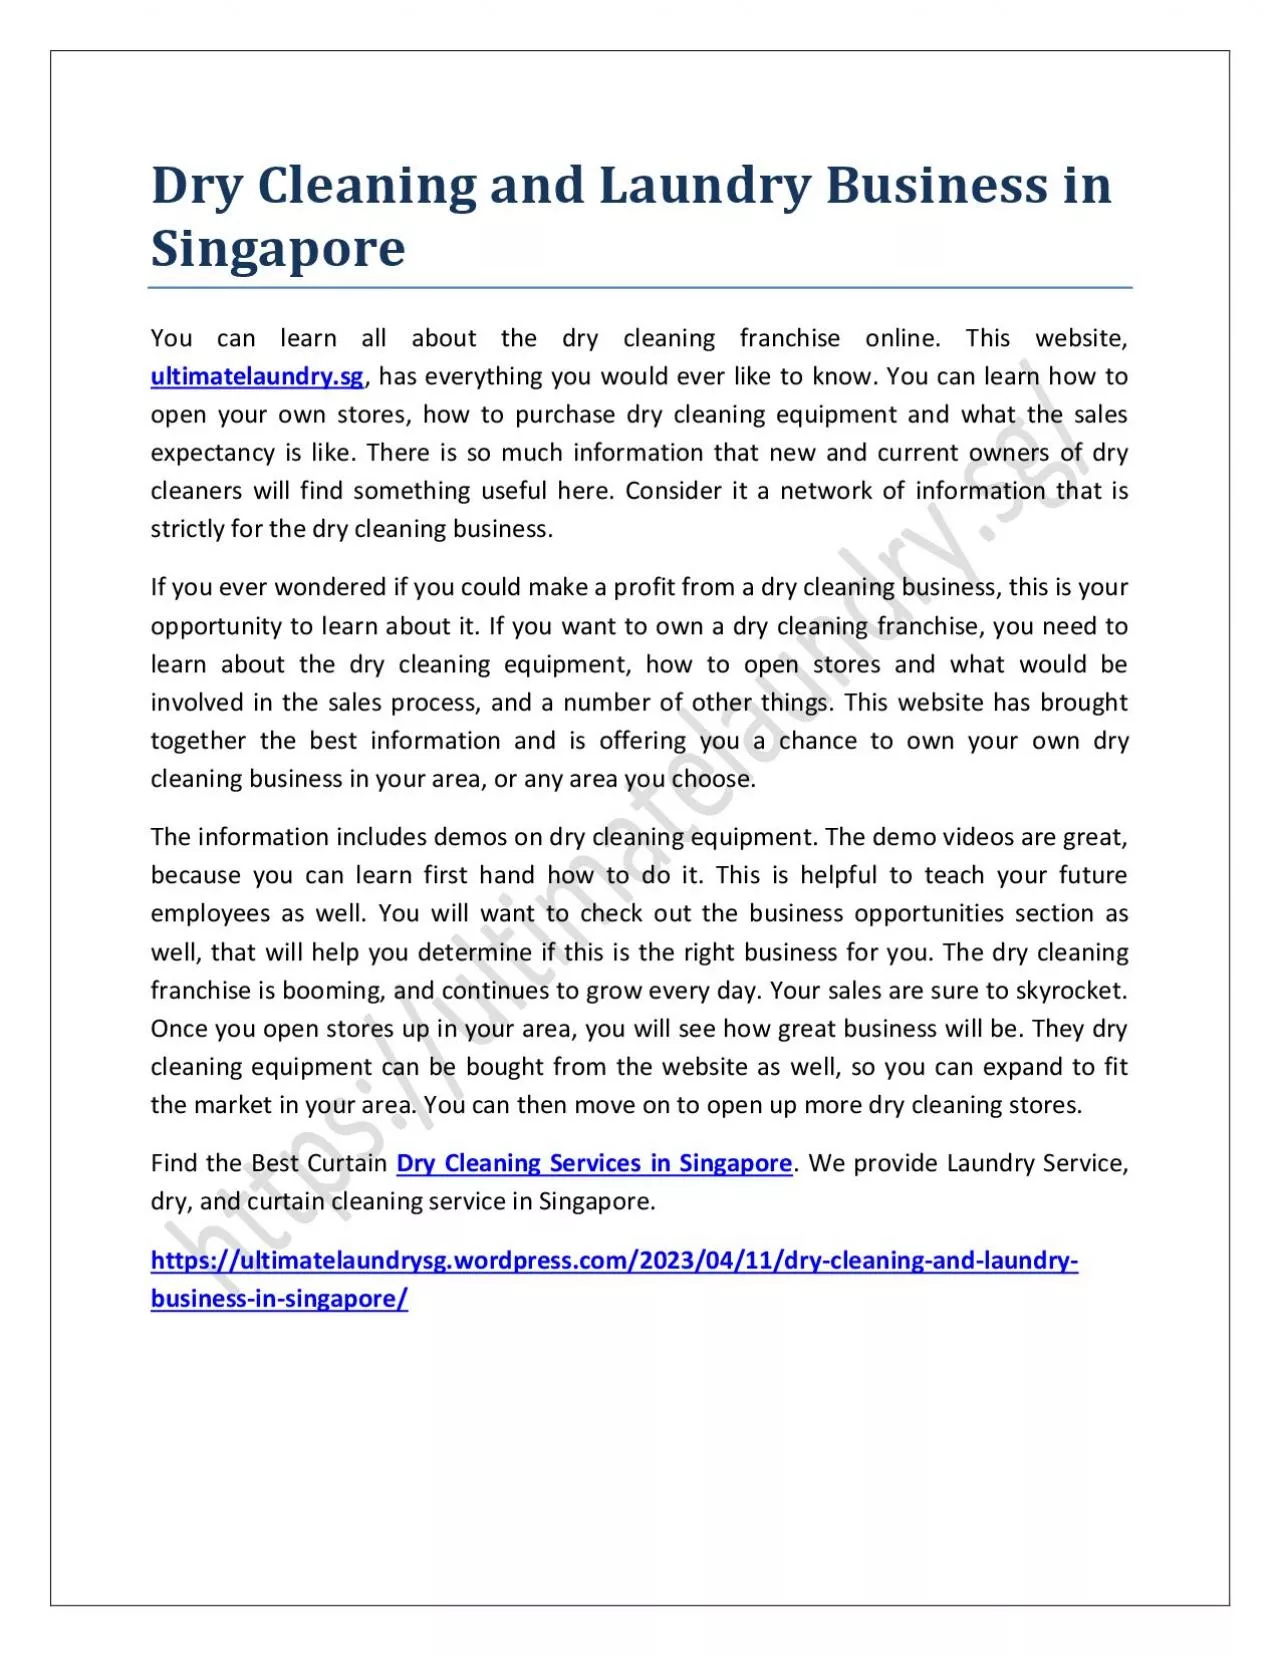 Dry Cleaning and Laundry Business in Singapore